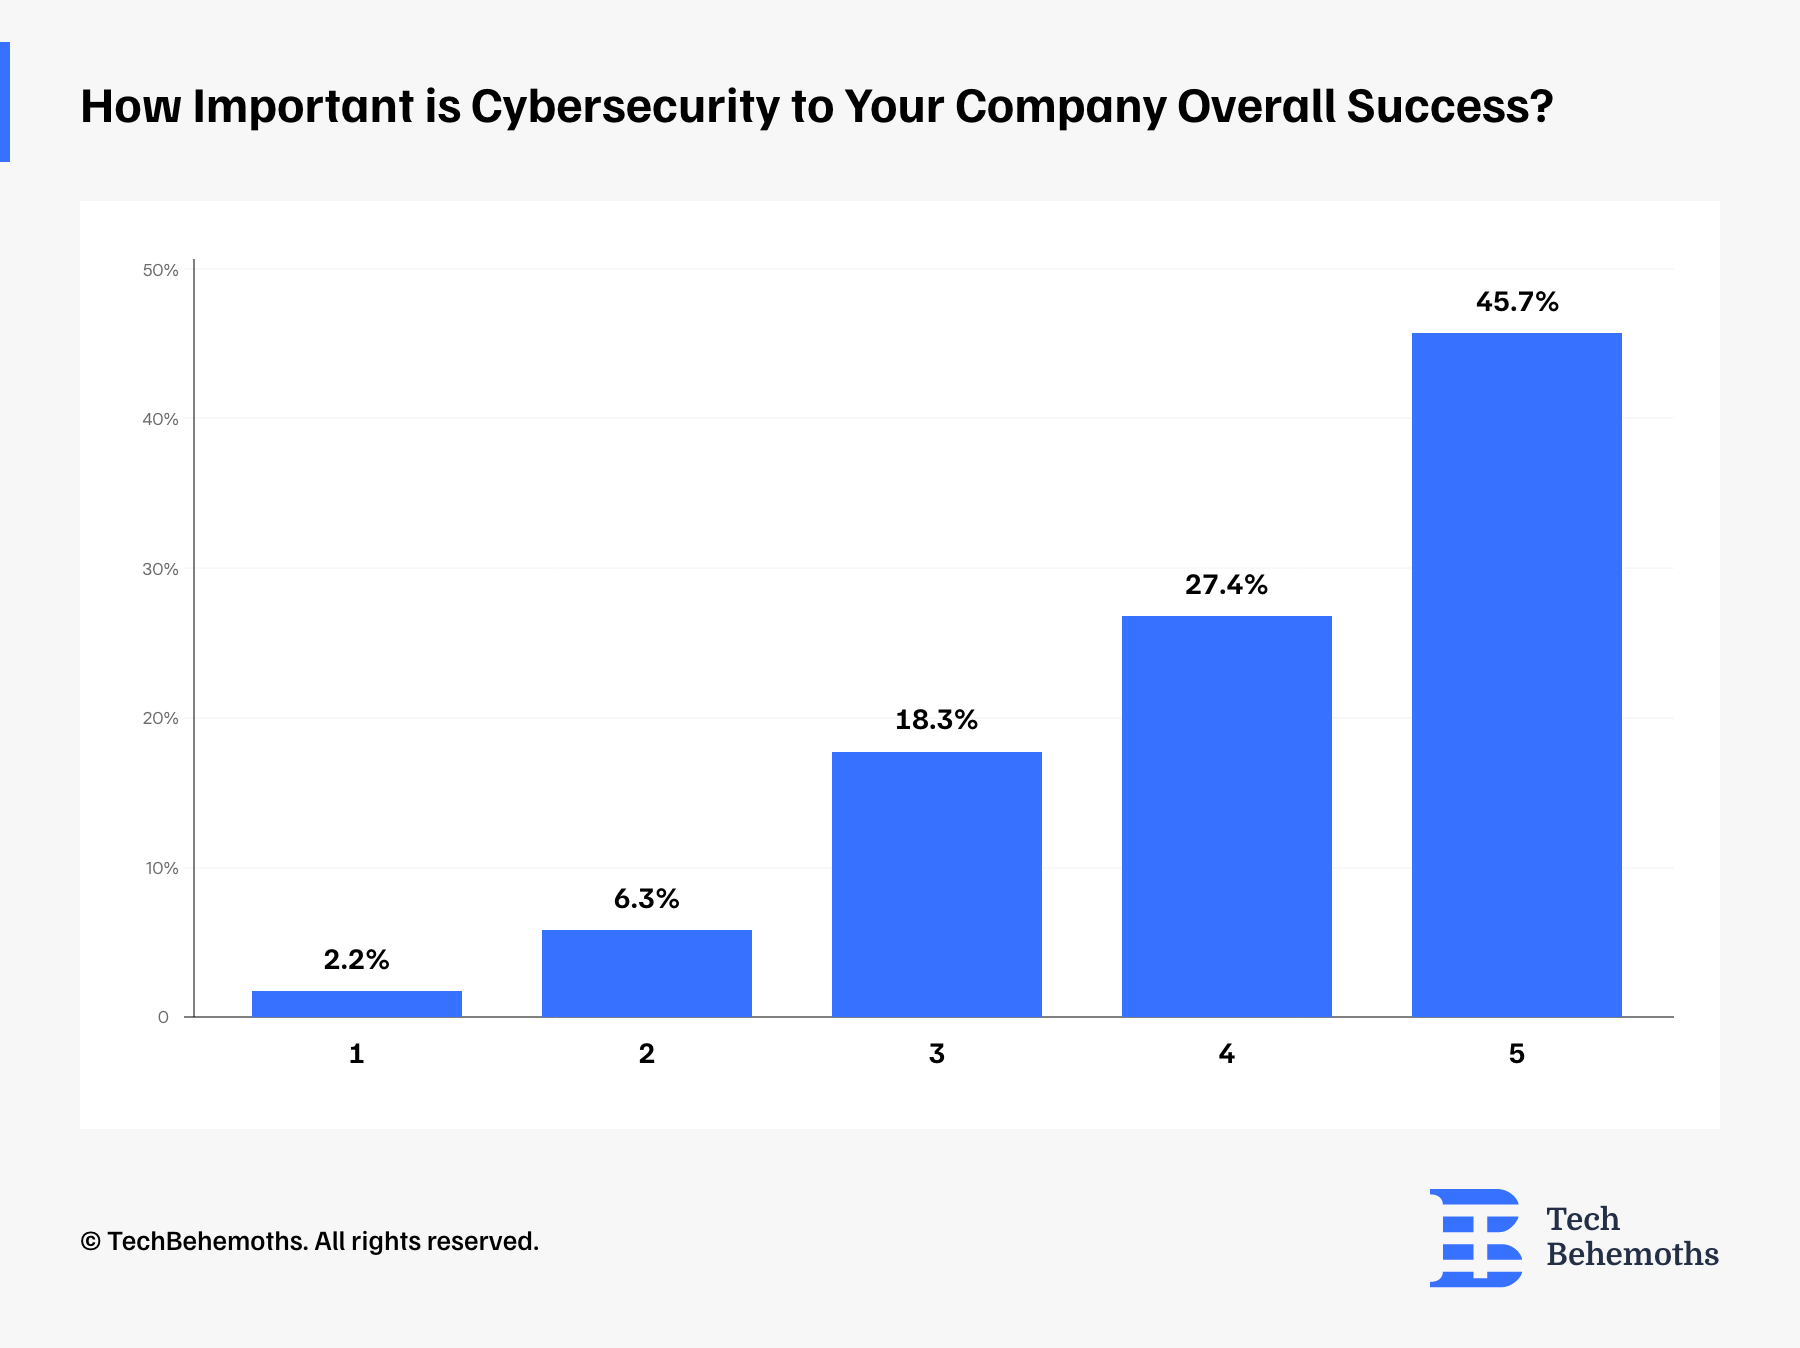 importance of cybersecurity to company succes